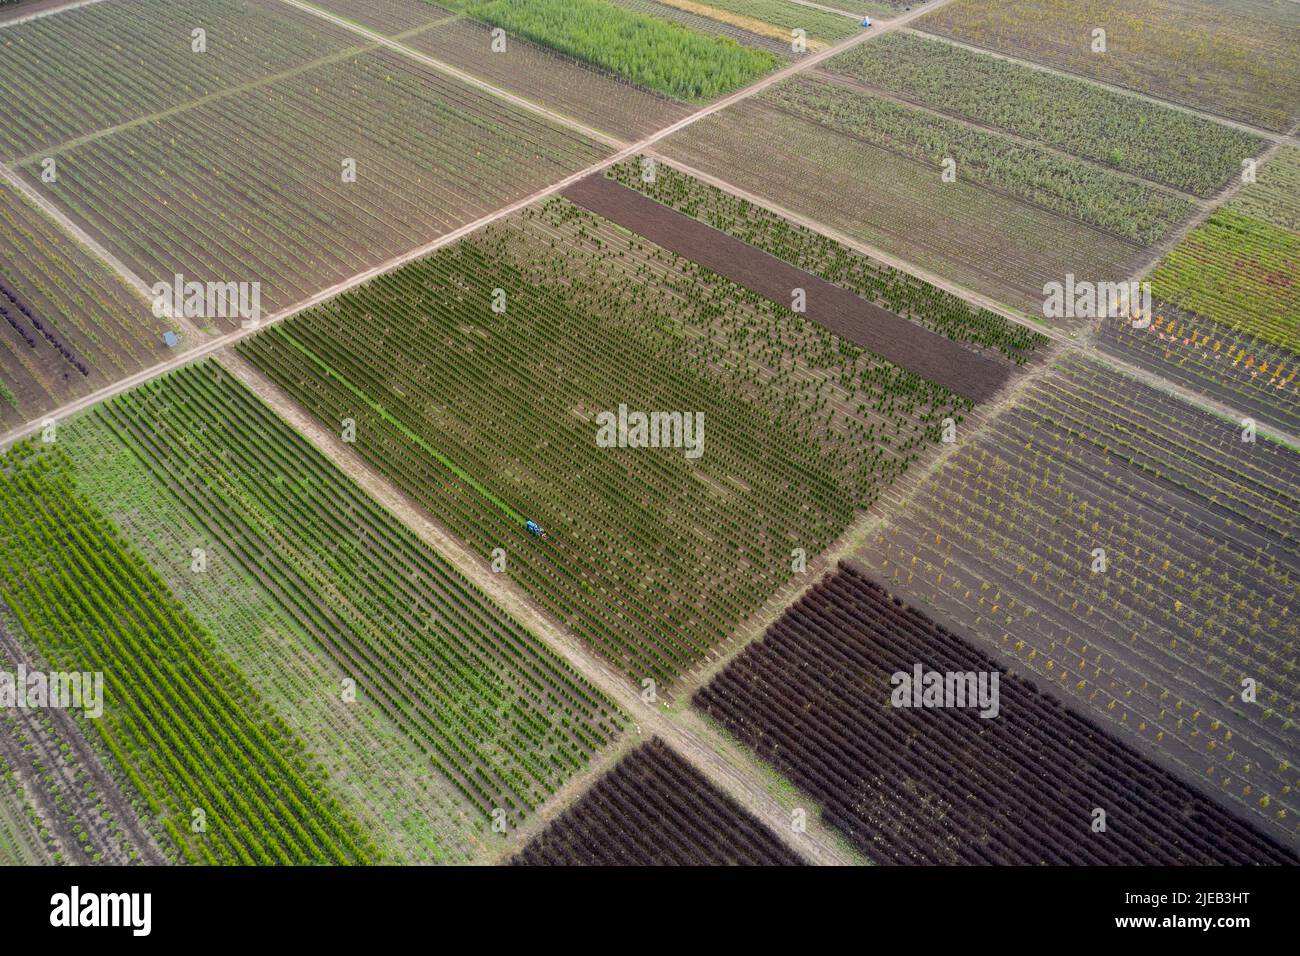 Aerial view of nursery with trees and plants. Stock Photo